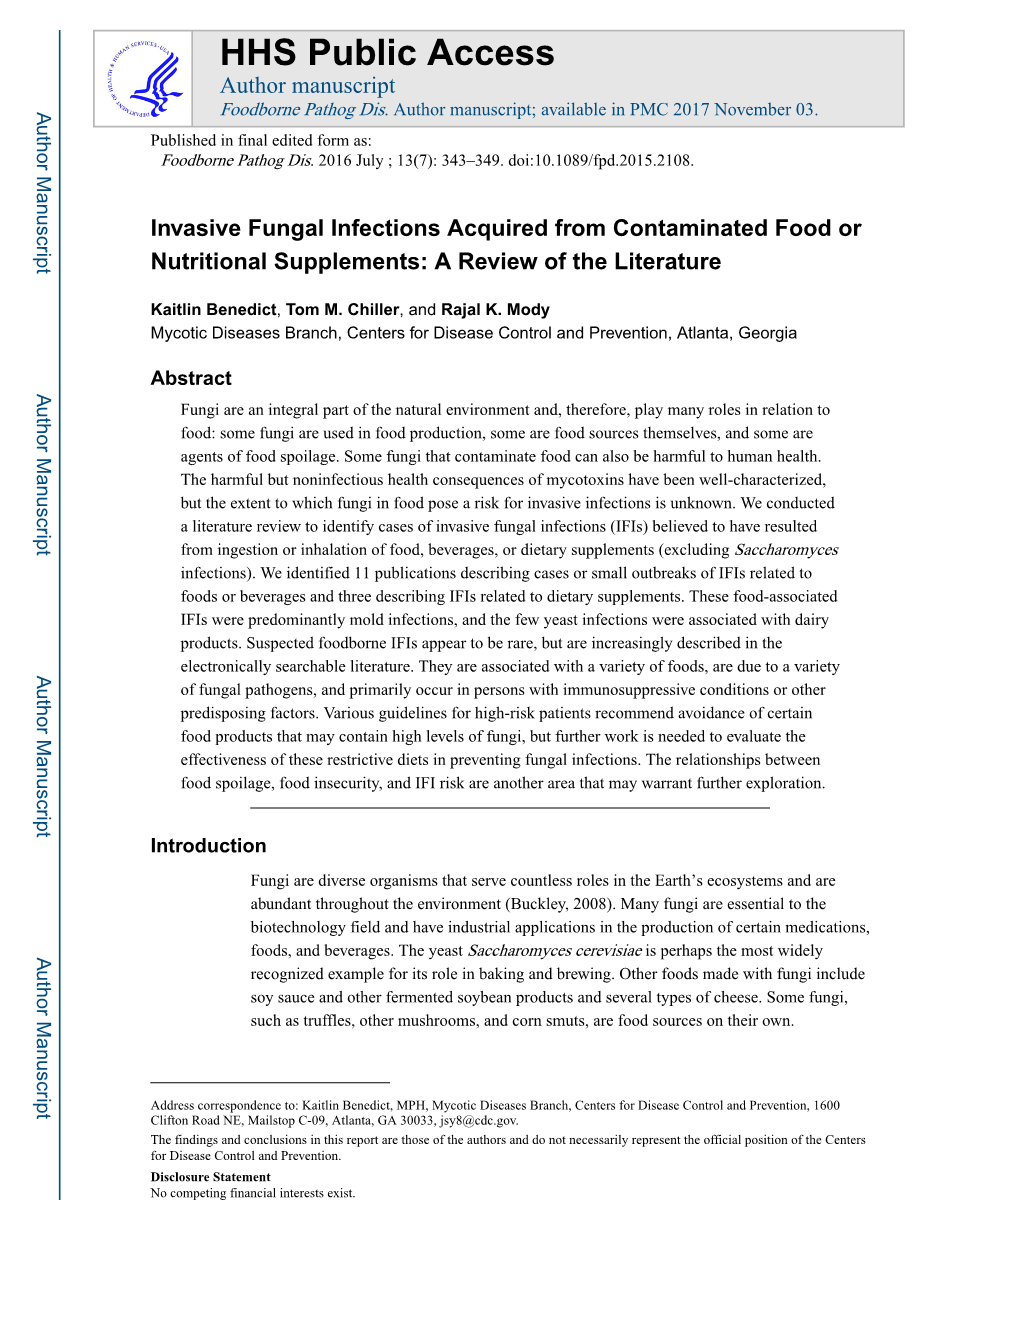 Invasive Fungal Infections Acquired from Contaminated Food Or Nutritional Supplements: a Review of the Literature